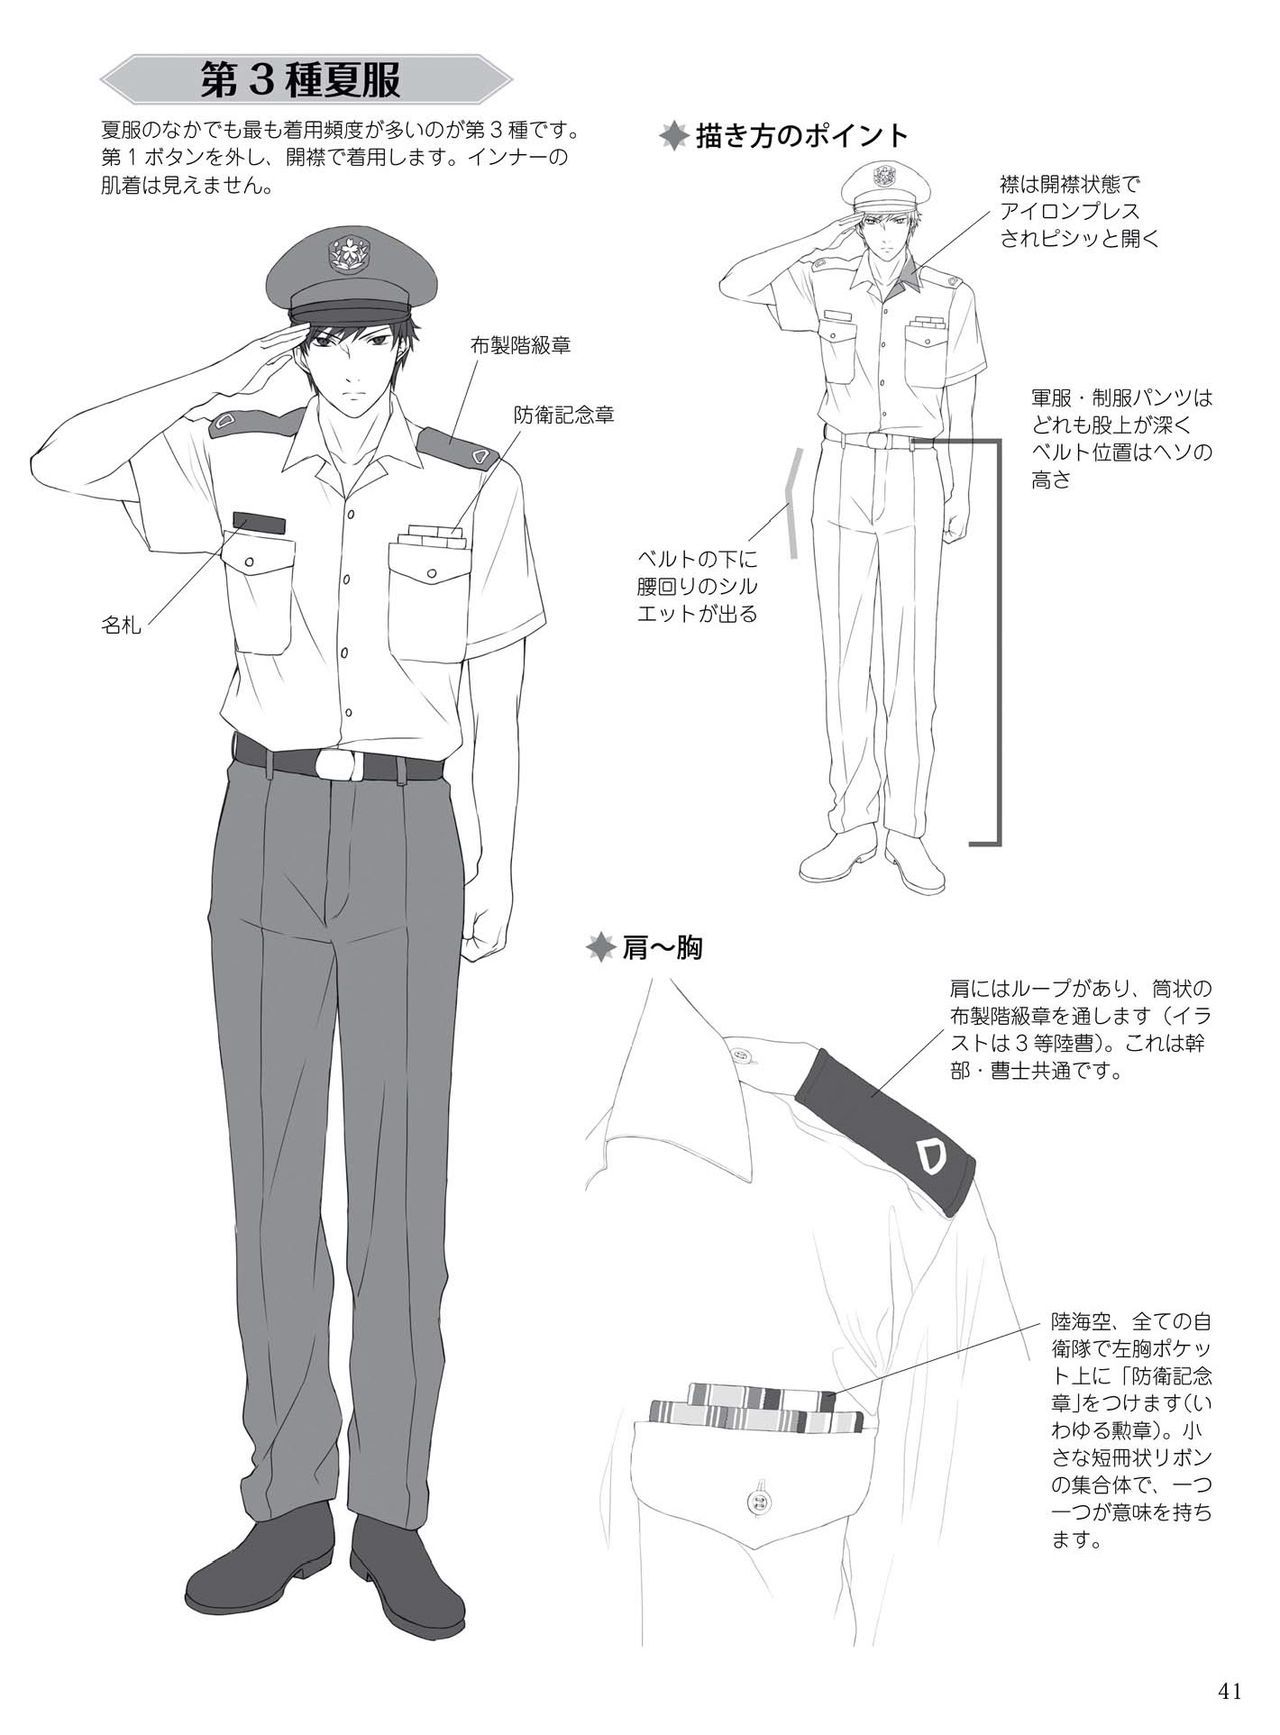 How to draw military uniforms and uniforms From Self-Defense Forces 軍服・制服の描き方 アメリカ軍・自衛隊の制服から戦闘服まで 44